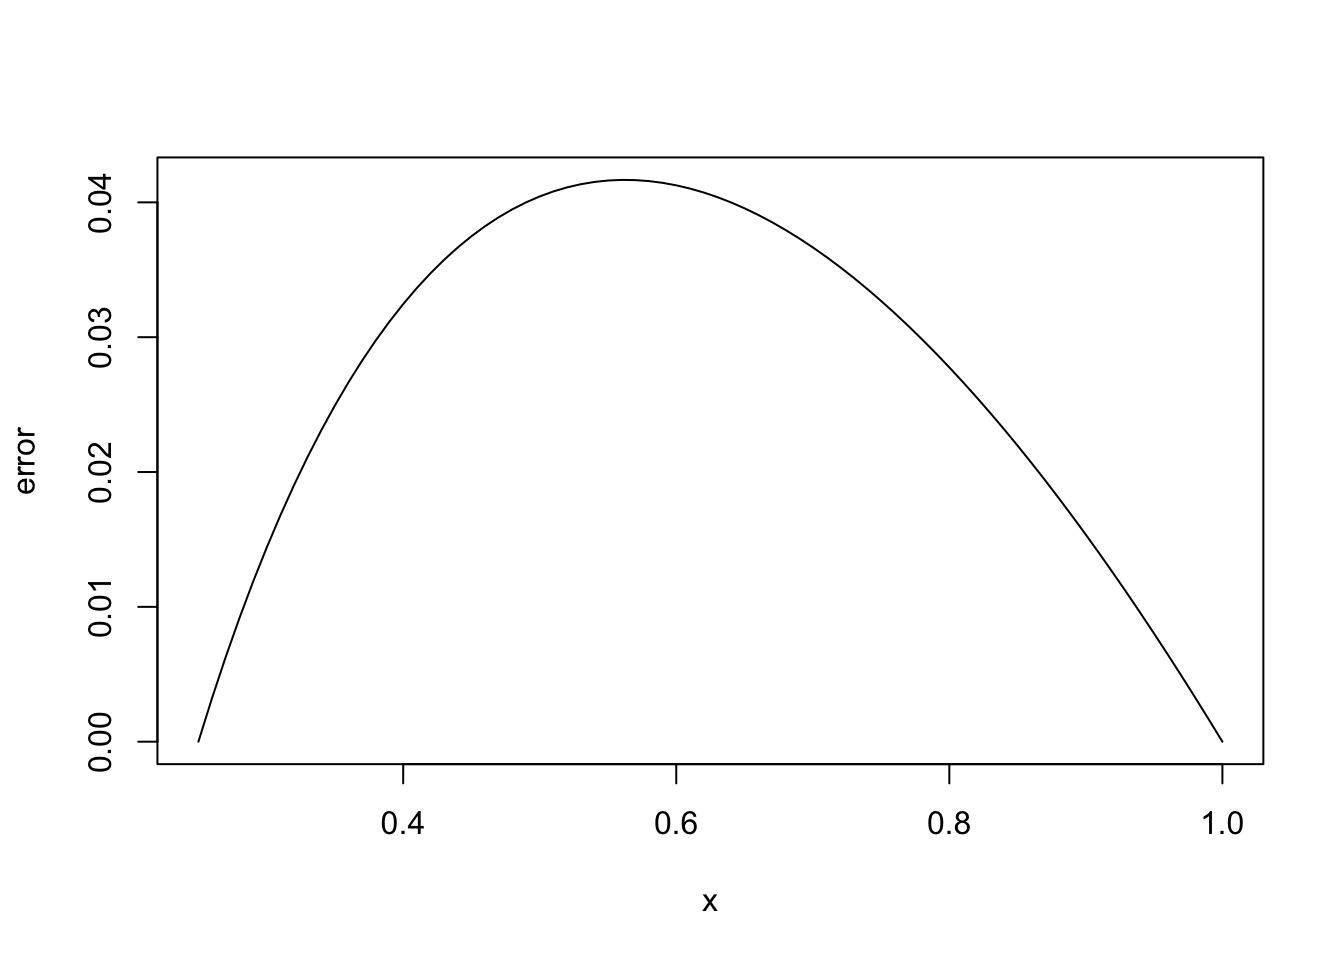 Linear interpolation of $f(x) = \sqrt{x}$ at $x_0 = 1/4$ and $x_1 = 1$